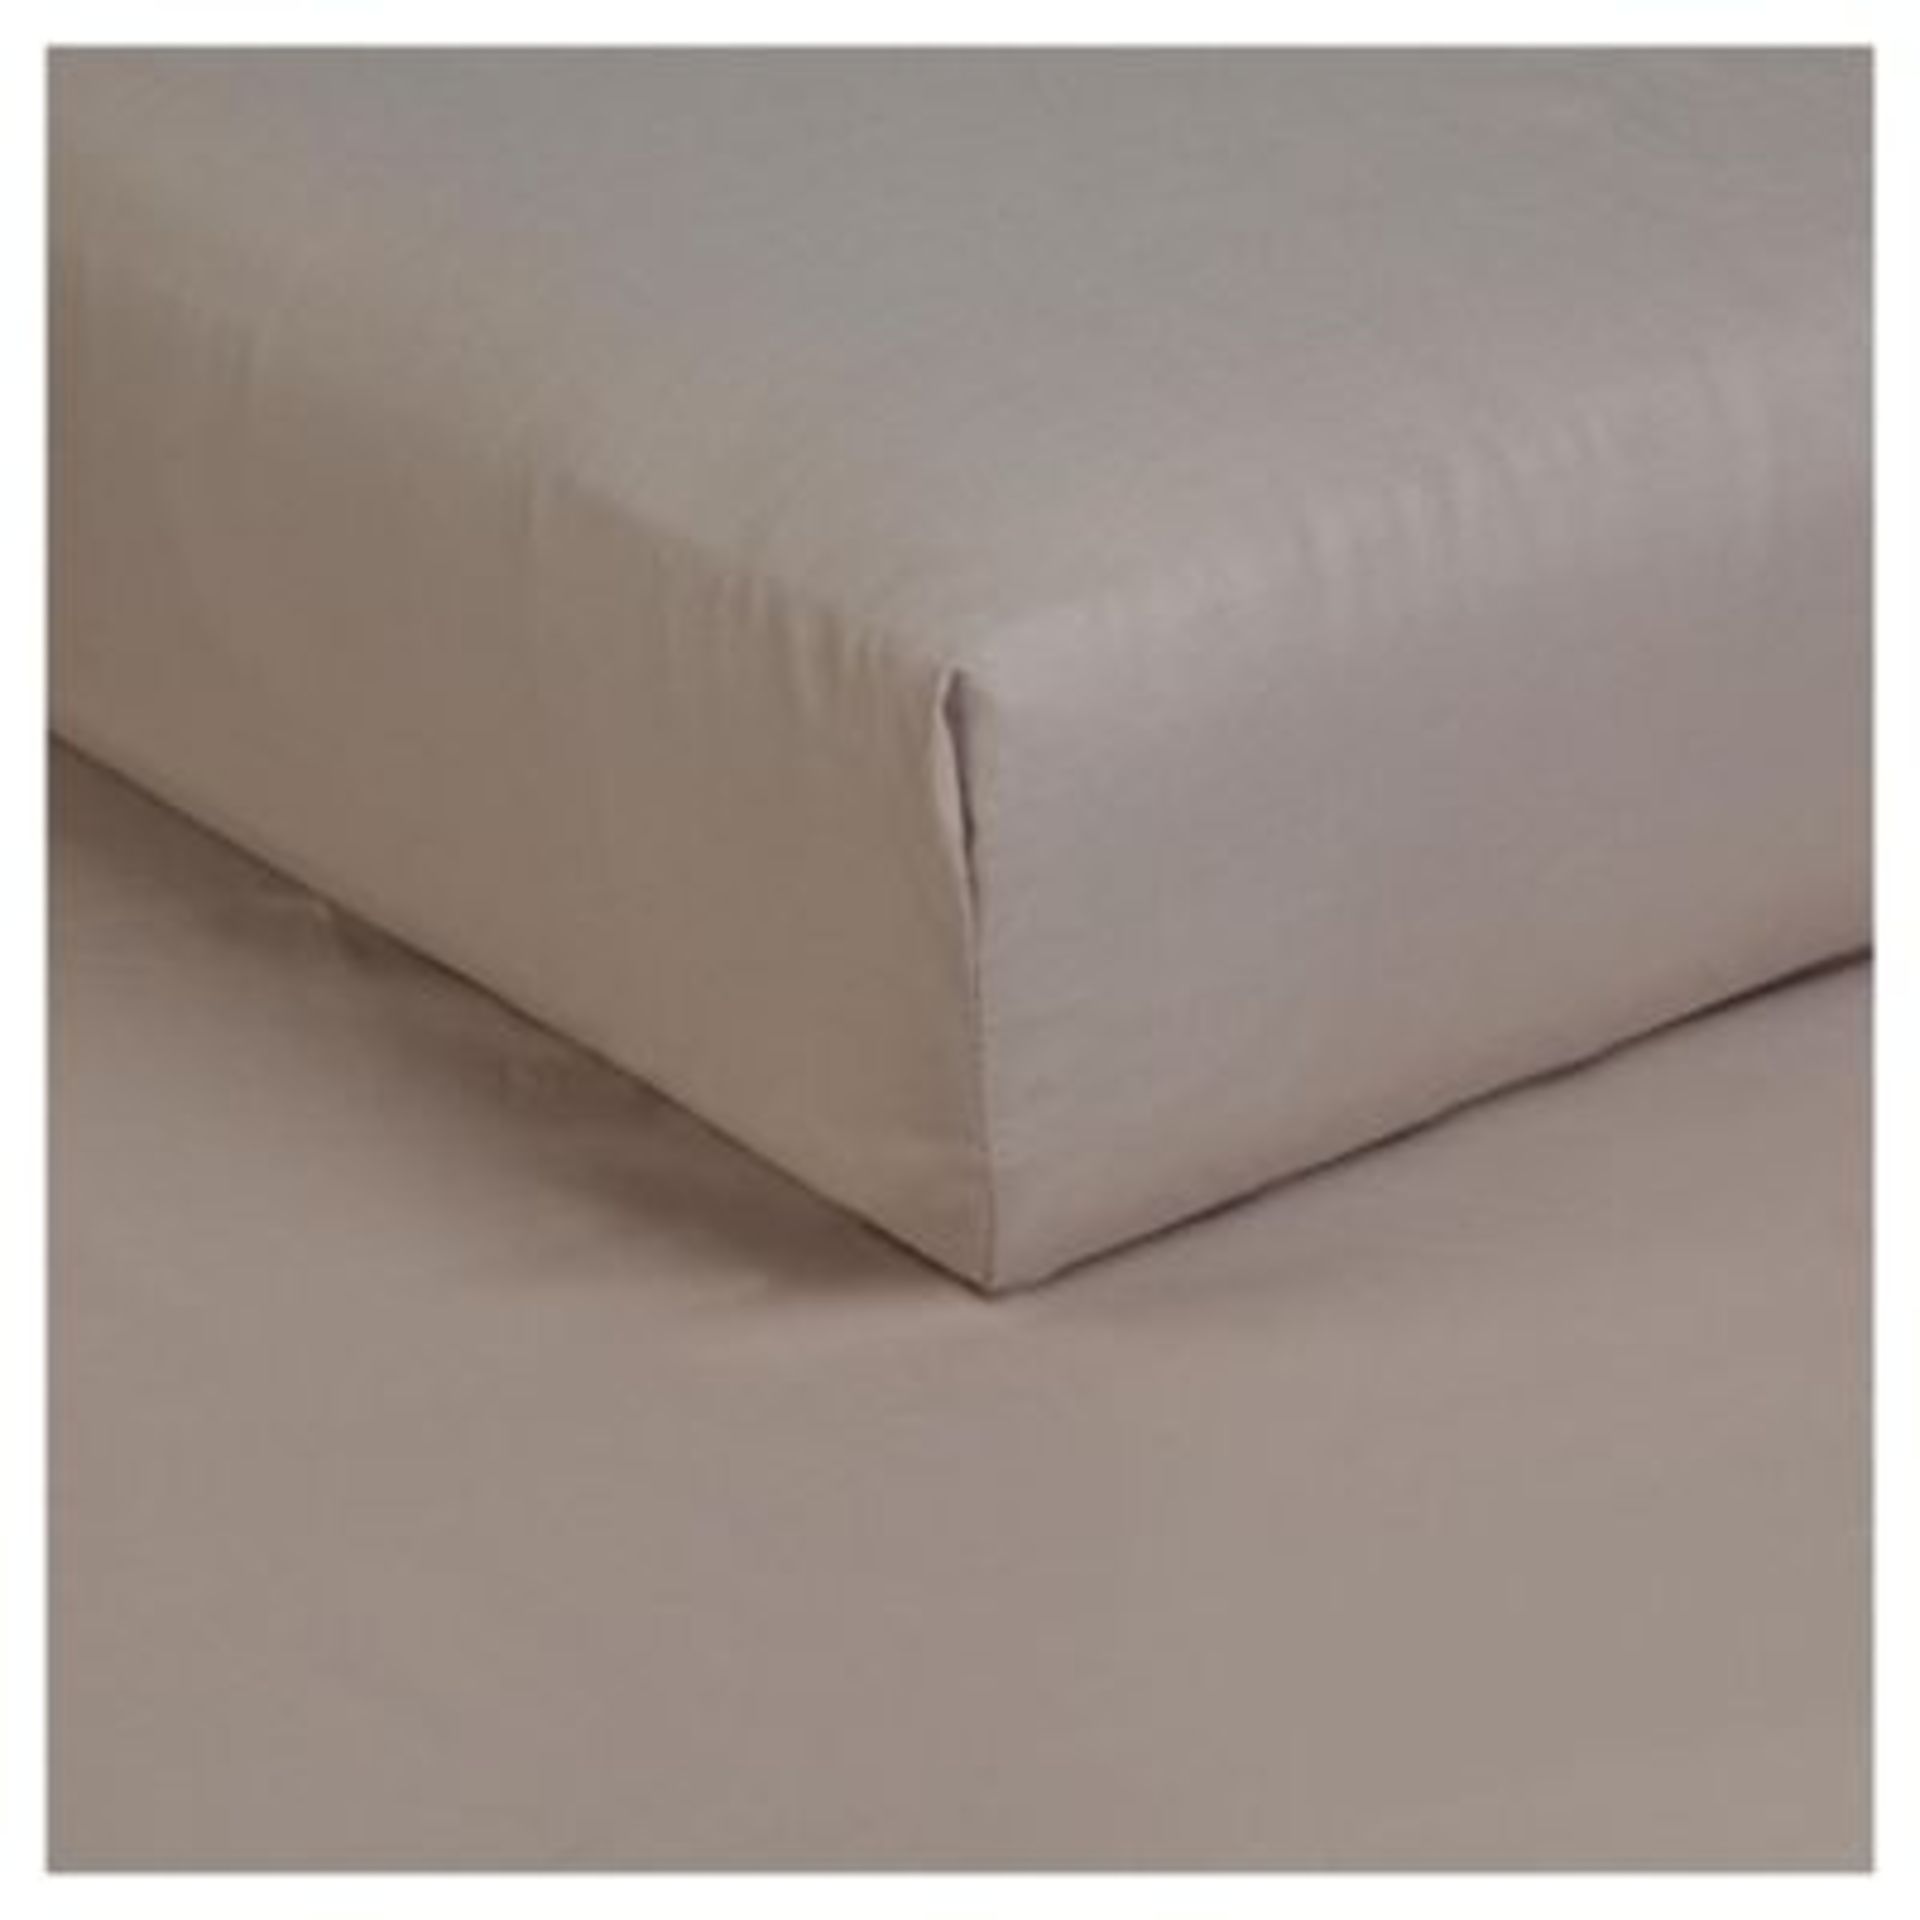 V *TRADE QTY* Brand New Luxury Egyptian Cotton Percale King Size Fitted Sheet - Biscuit/Beige ISP £